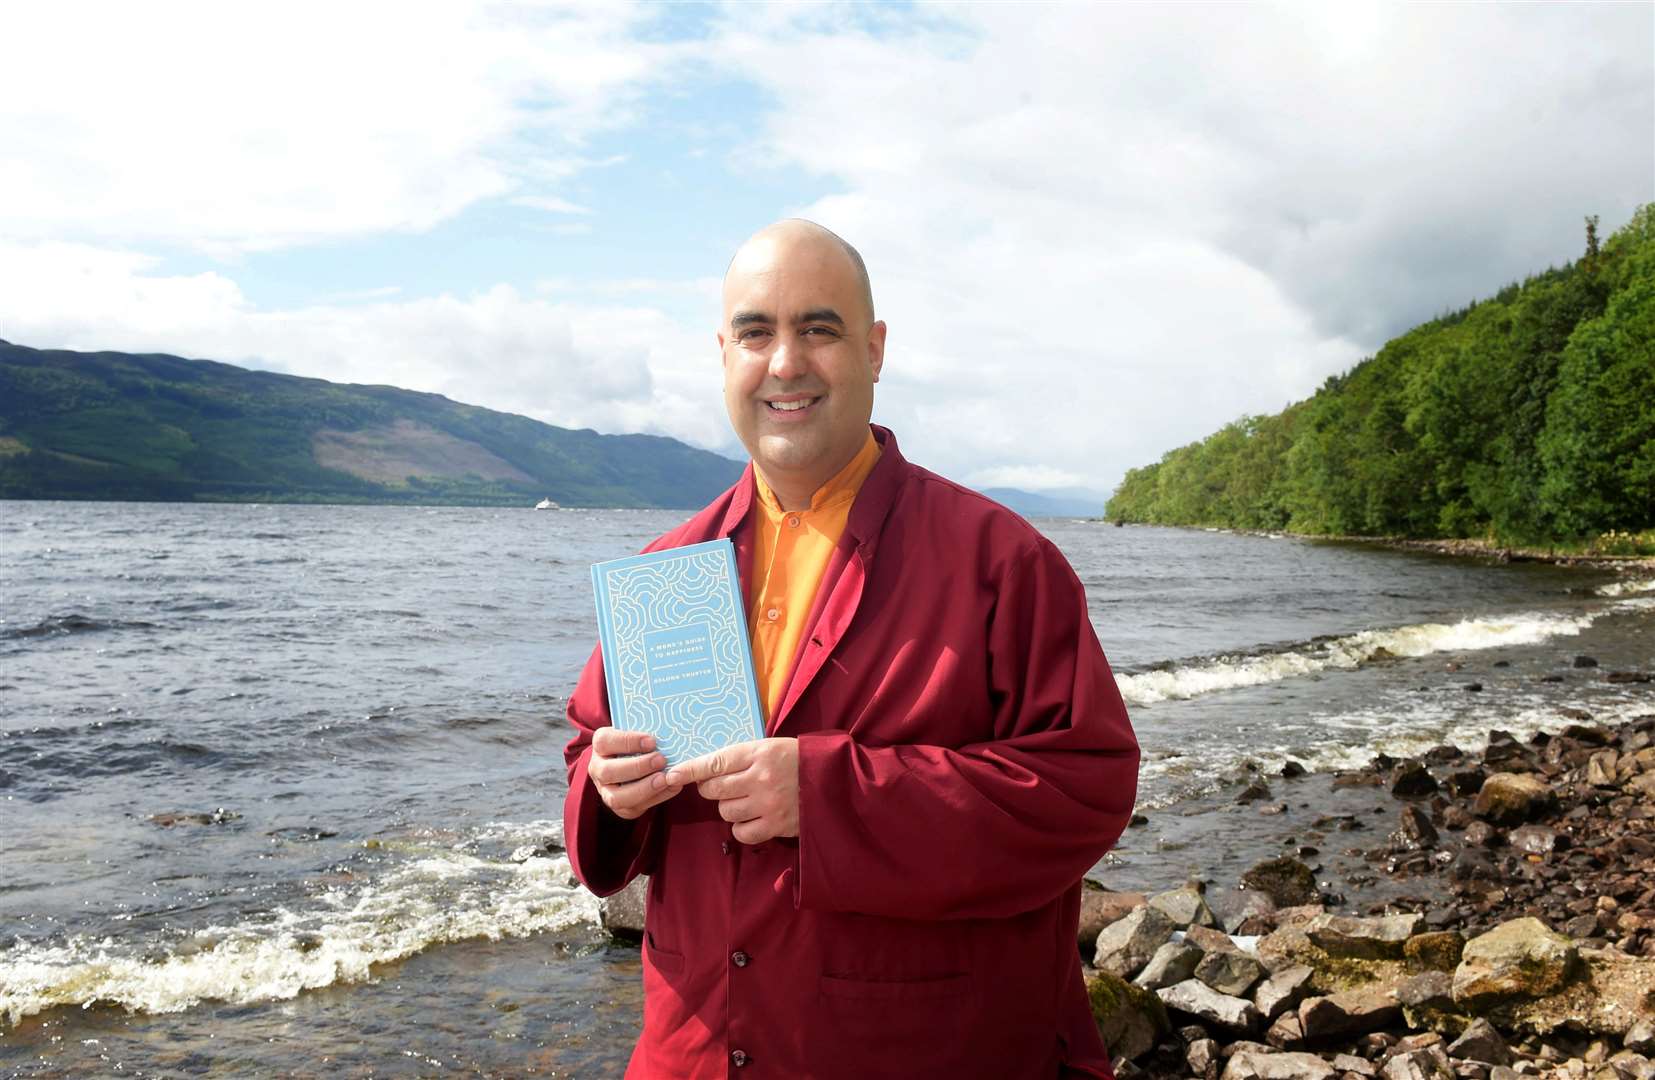 Buddhist monk Gelong Thubten at the launch of his book beside Loch Ness...Picture: Callum Mackay. Image No. 044470.